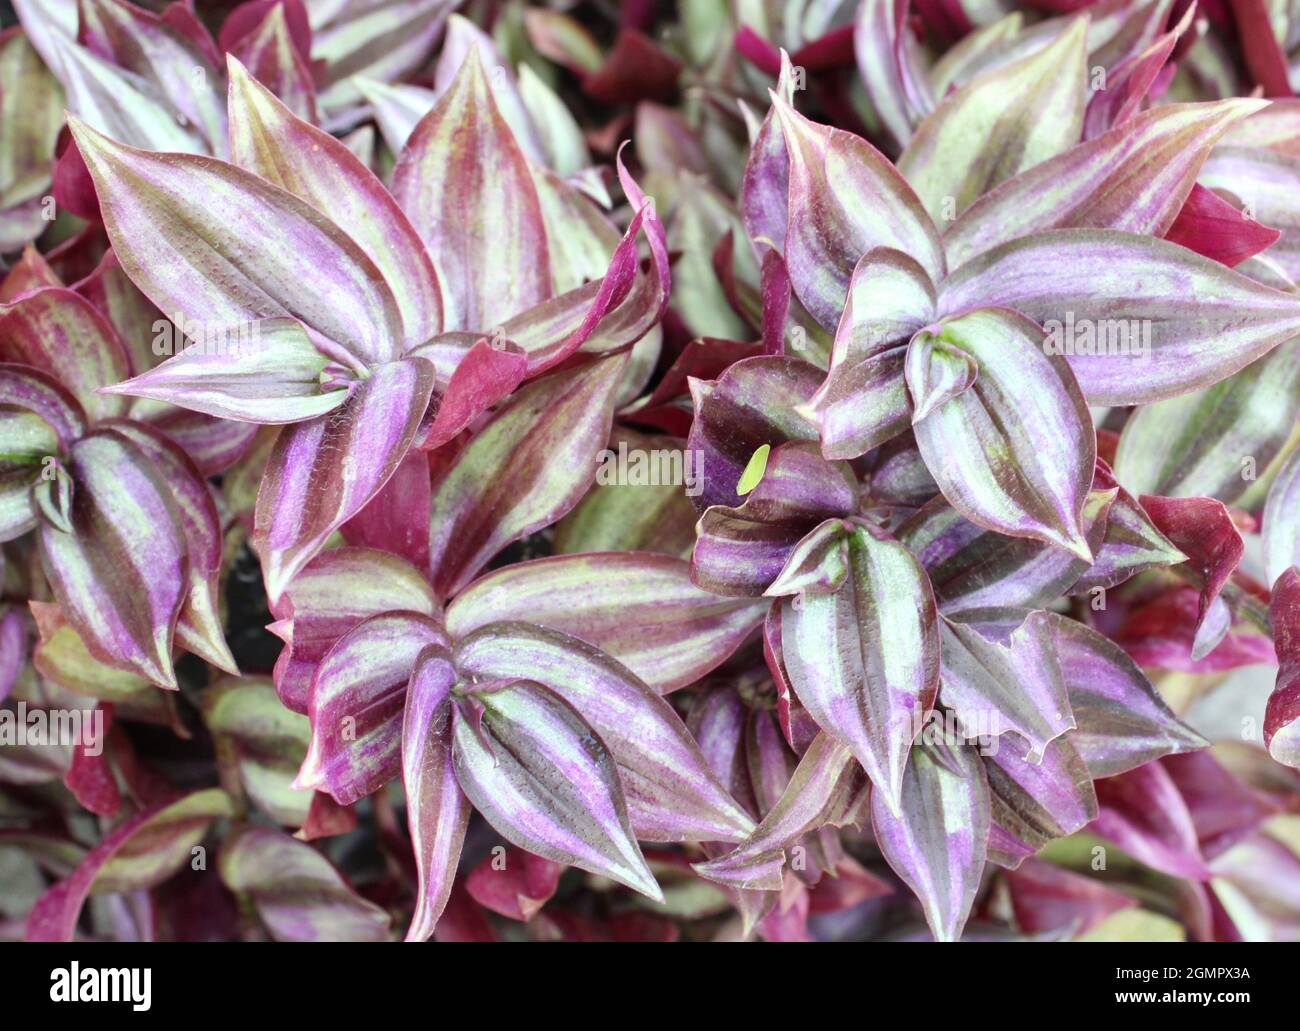 Zebrina Pendula also known as a Wandering Jew inch plant. Stock Photo